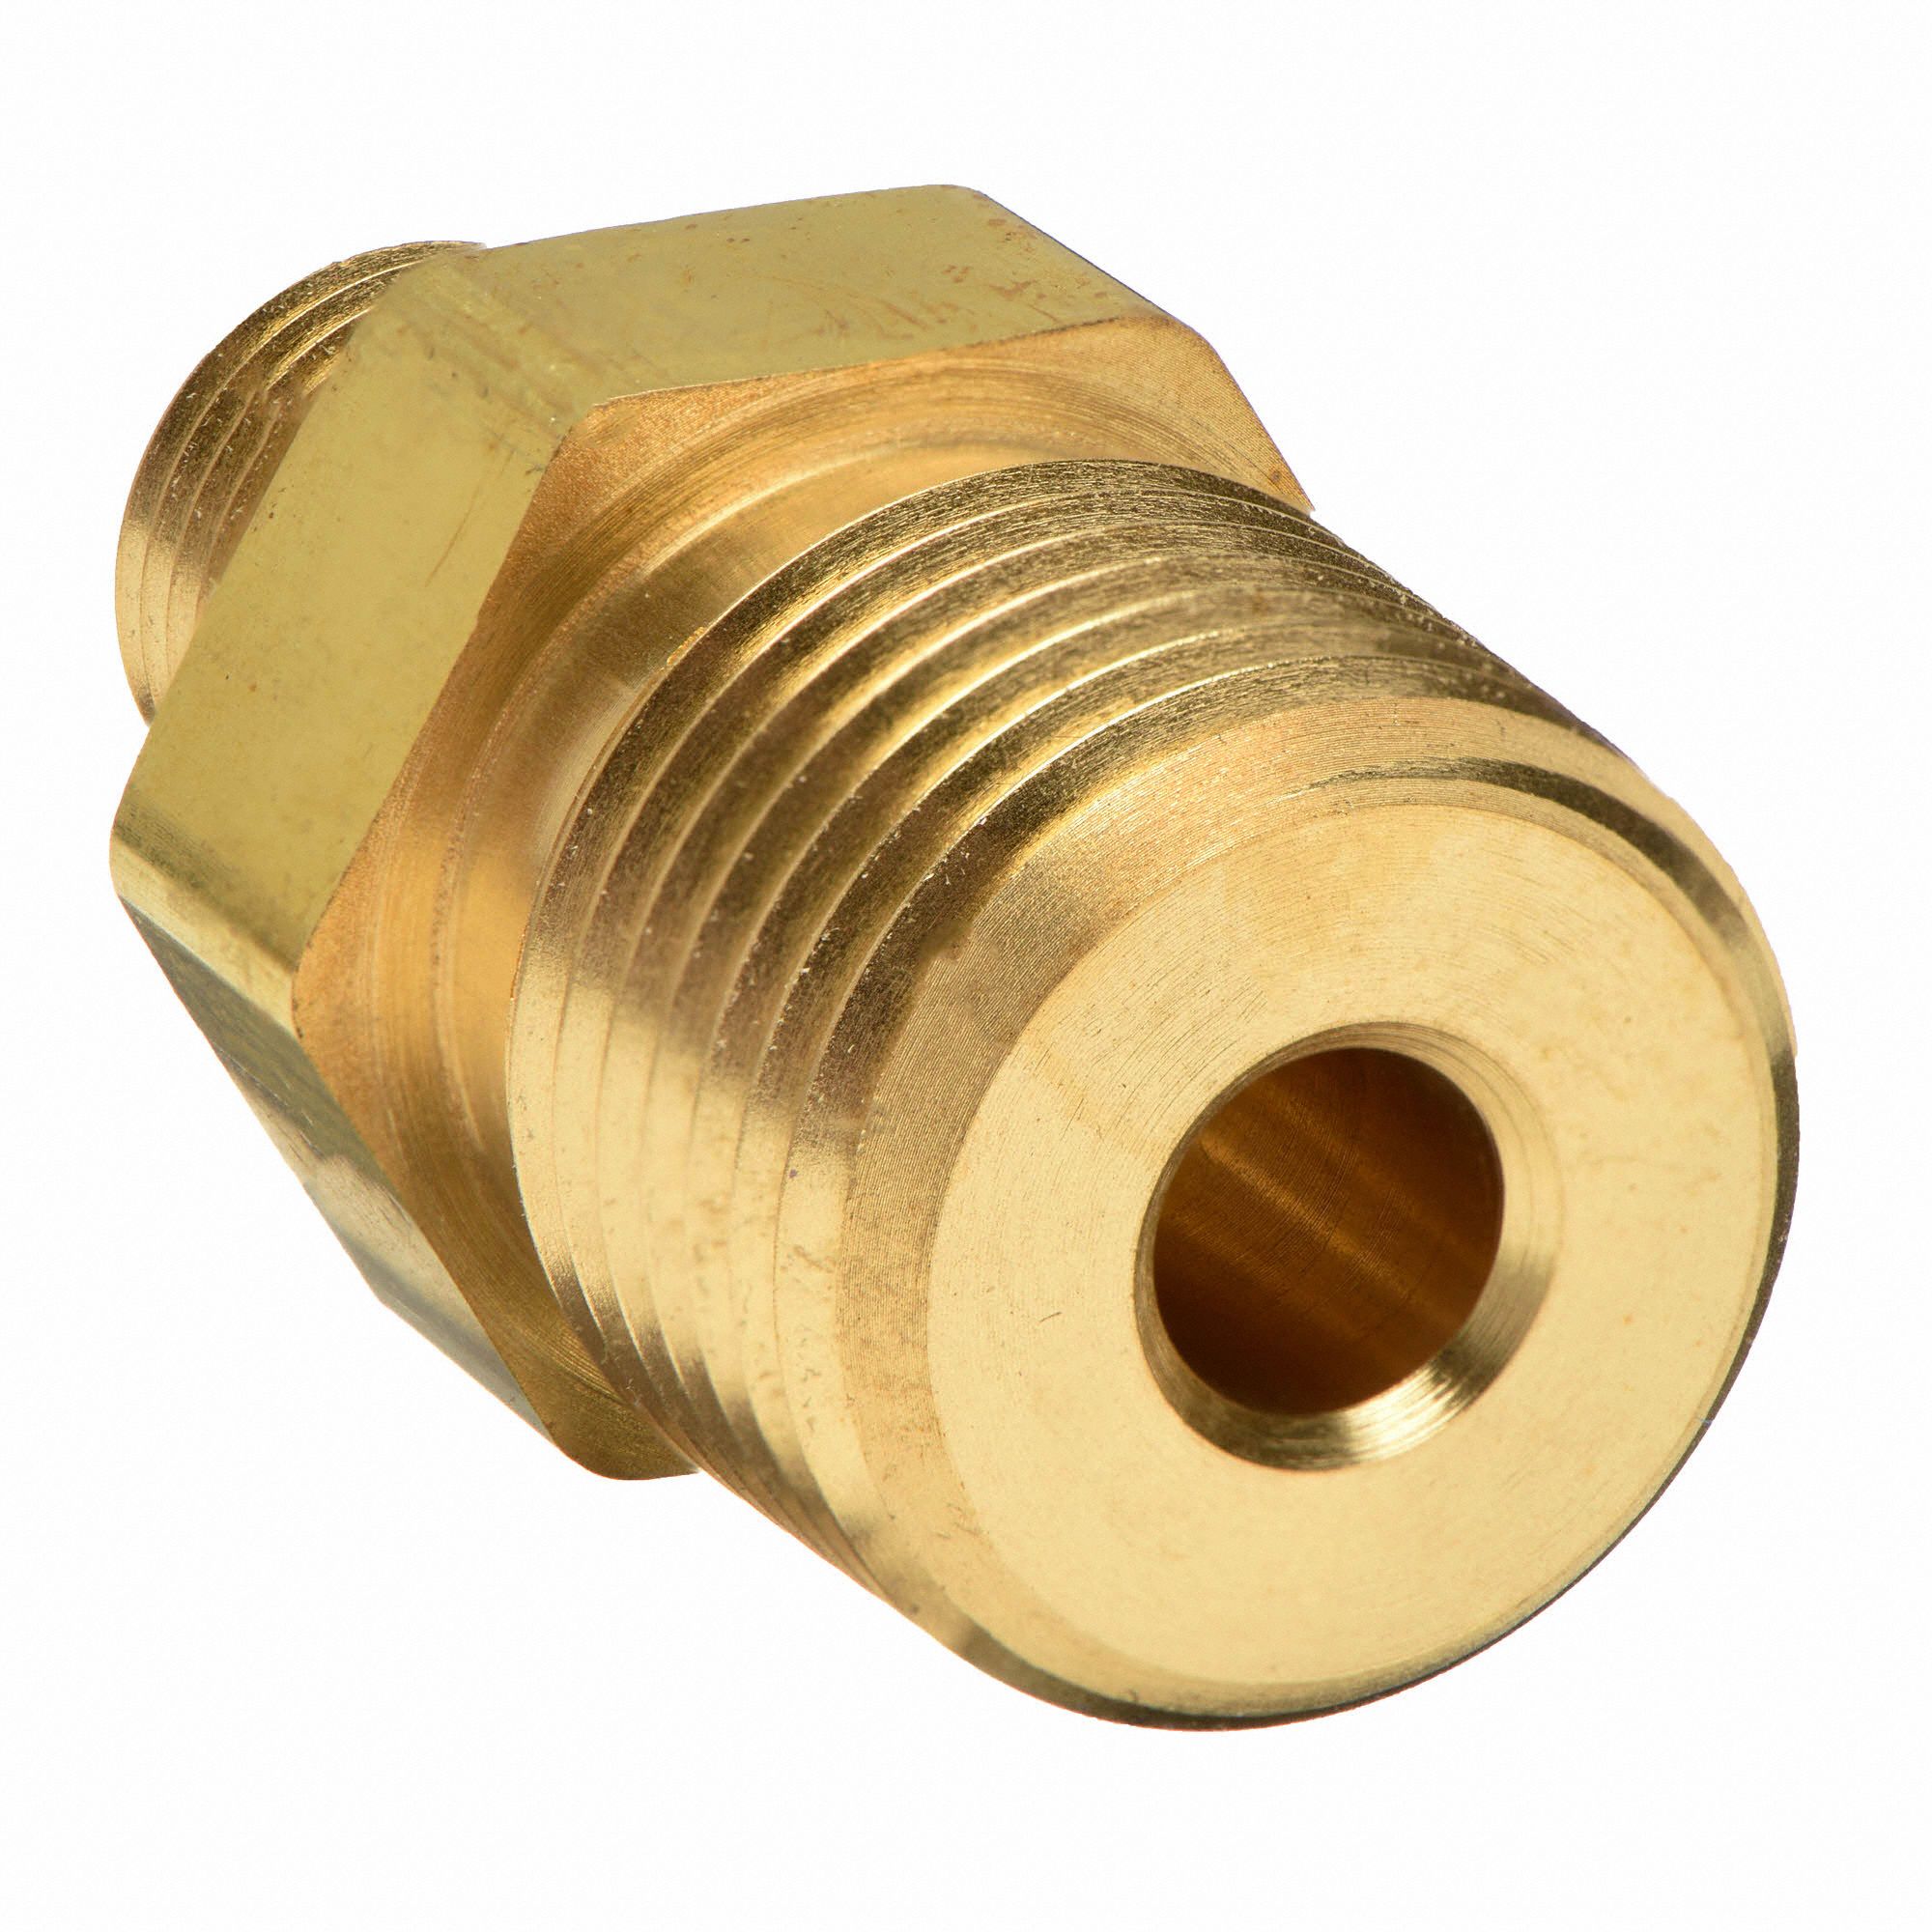 1/8" NPT *1/4" NPT Reducing Hex Nipple Connector  Brsss Pipe Fitting 